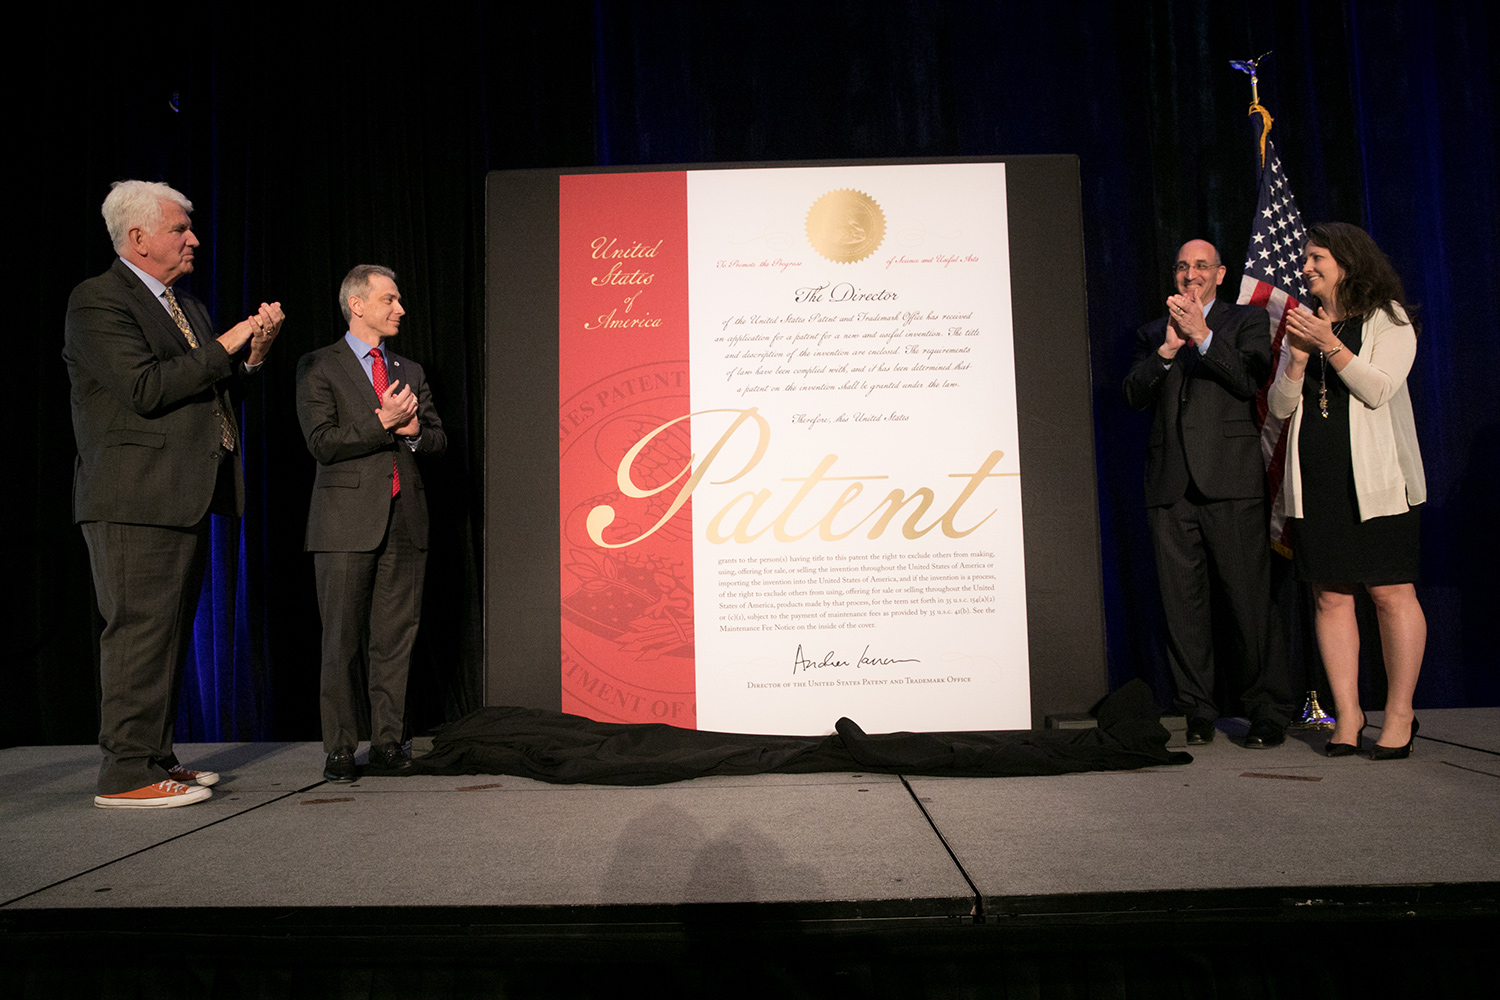 Inventors Susann Keohane and Robert Metcalfe helping USPTO Director Andrei Iancu and Drew Hirshfeld, unveil the new cover design to commemorate the the 10 millionth utility patent at the South by Southwest conference.